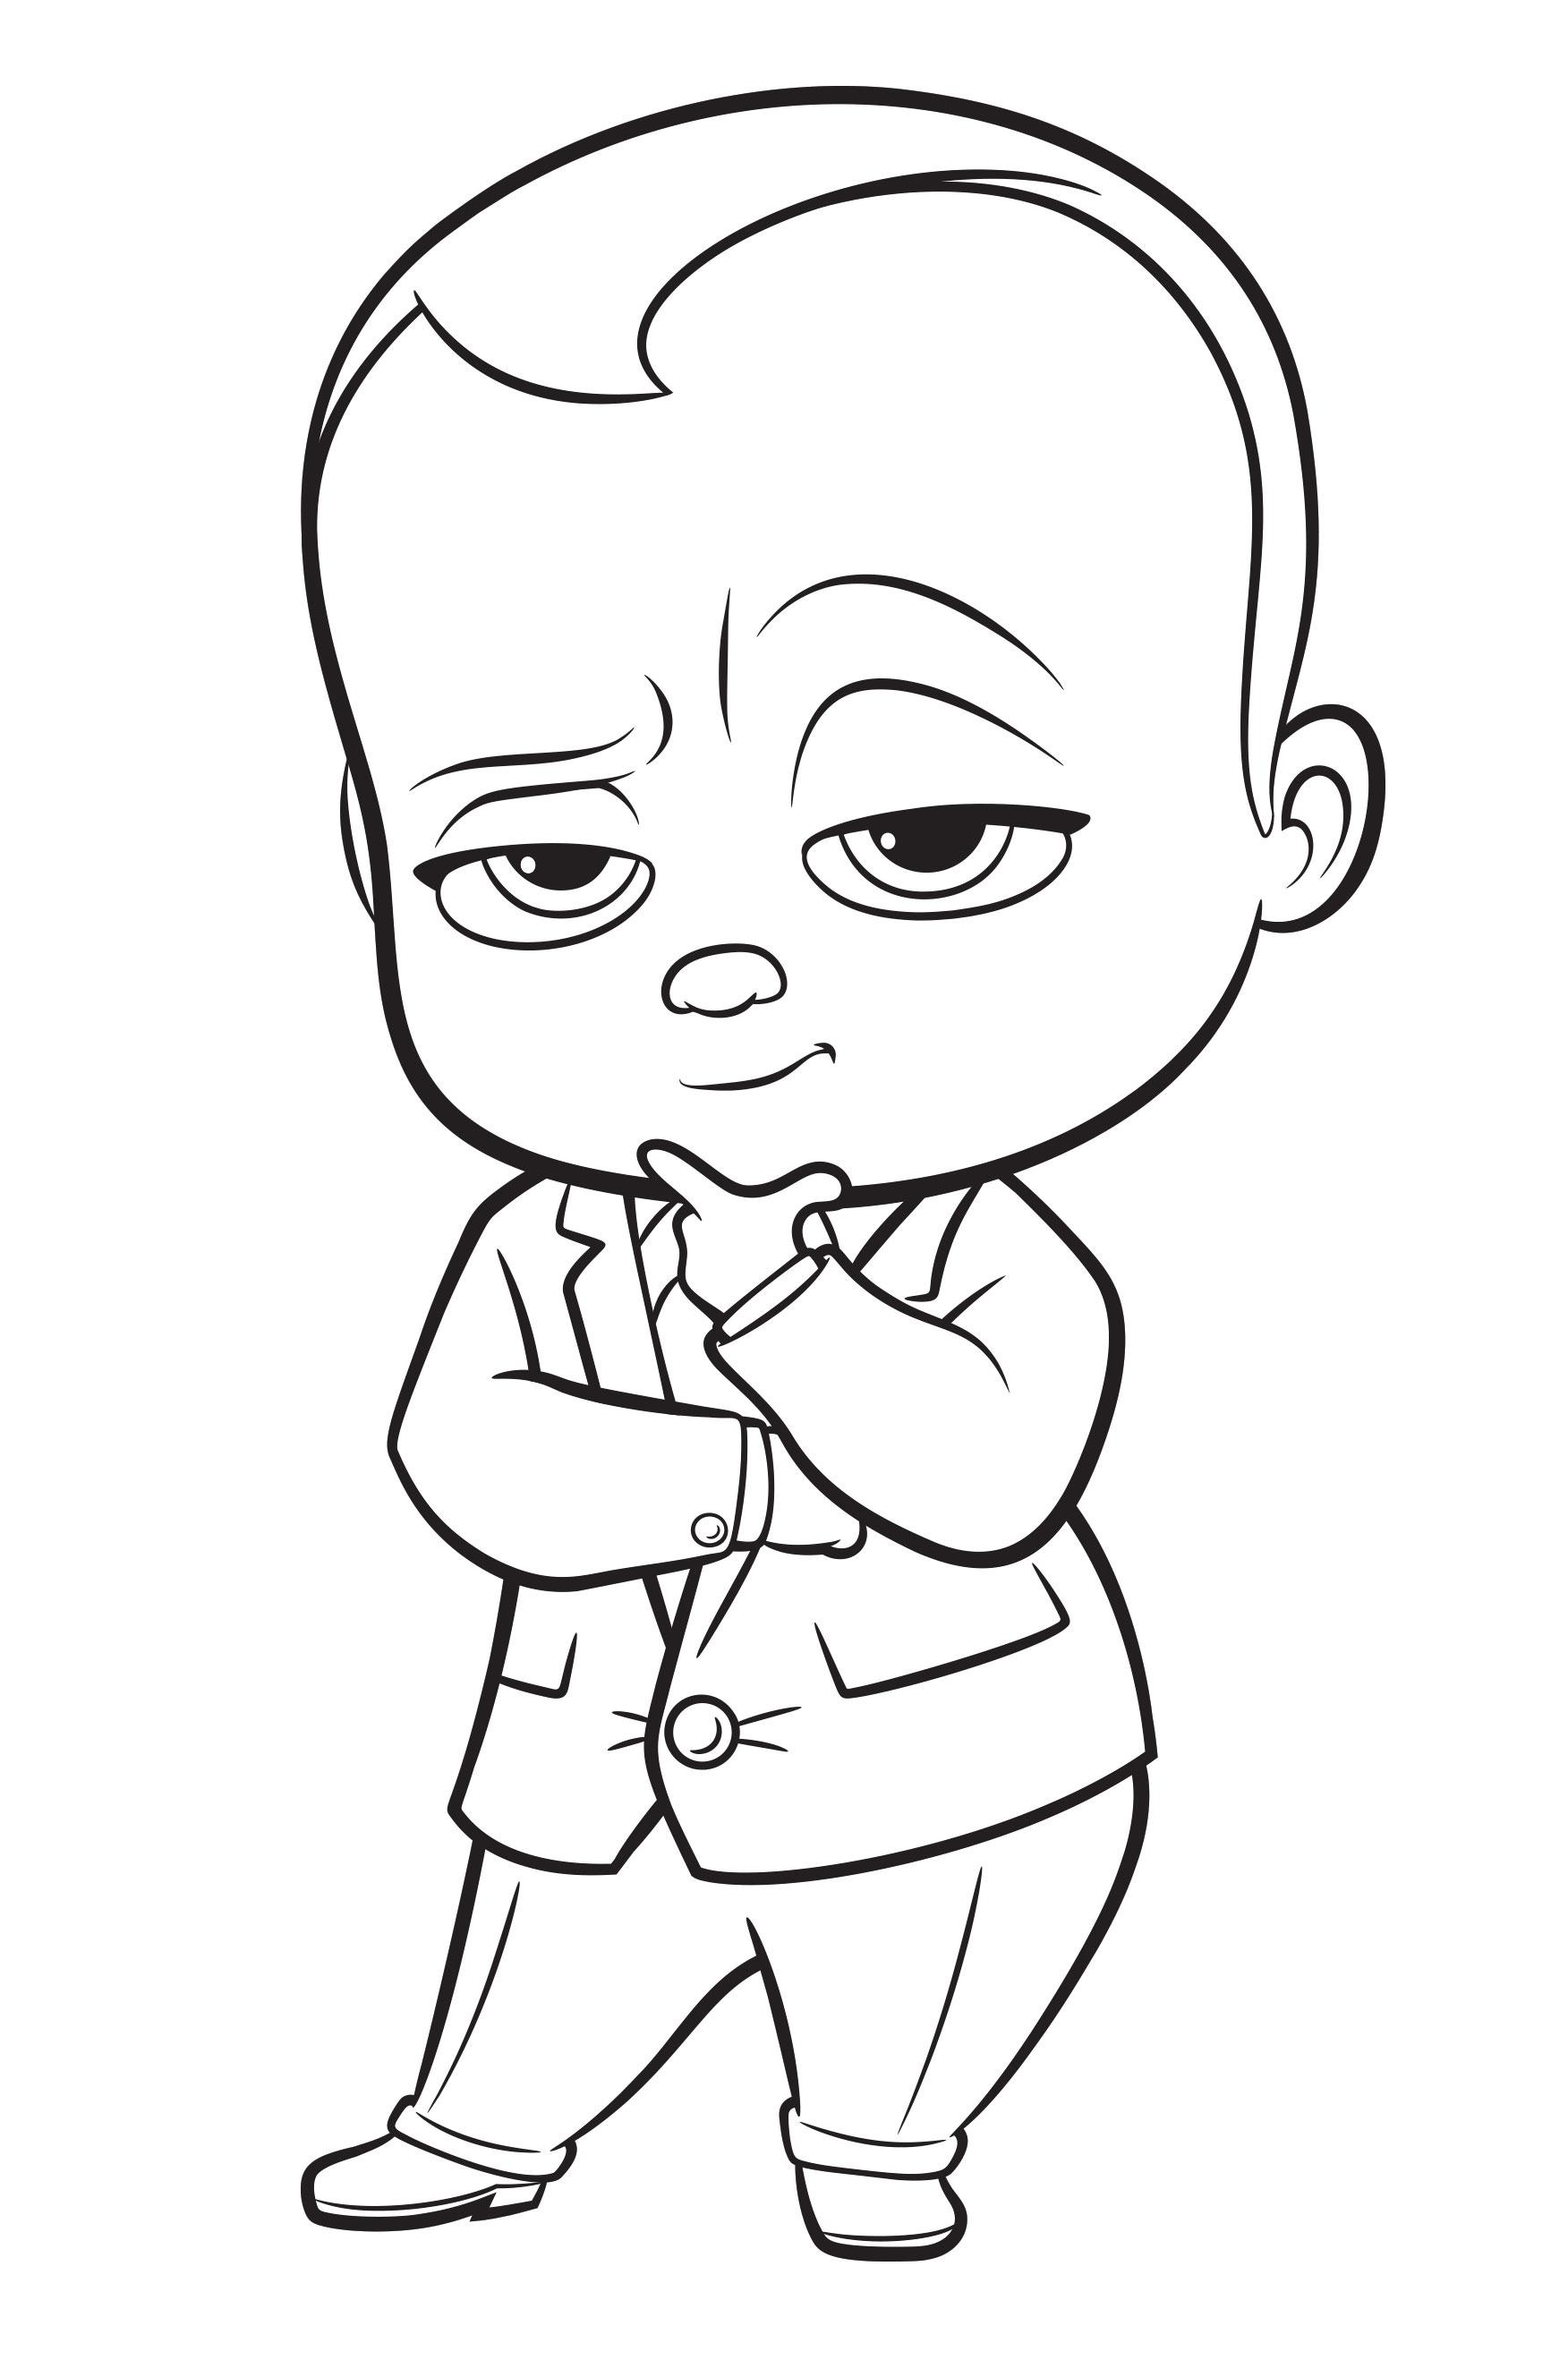 Baby Pictures Coloring Pages Pdf - Boss Baby Pictures Coloring Pages